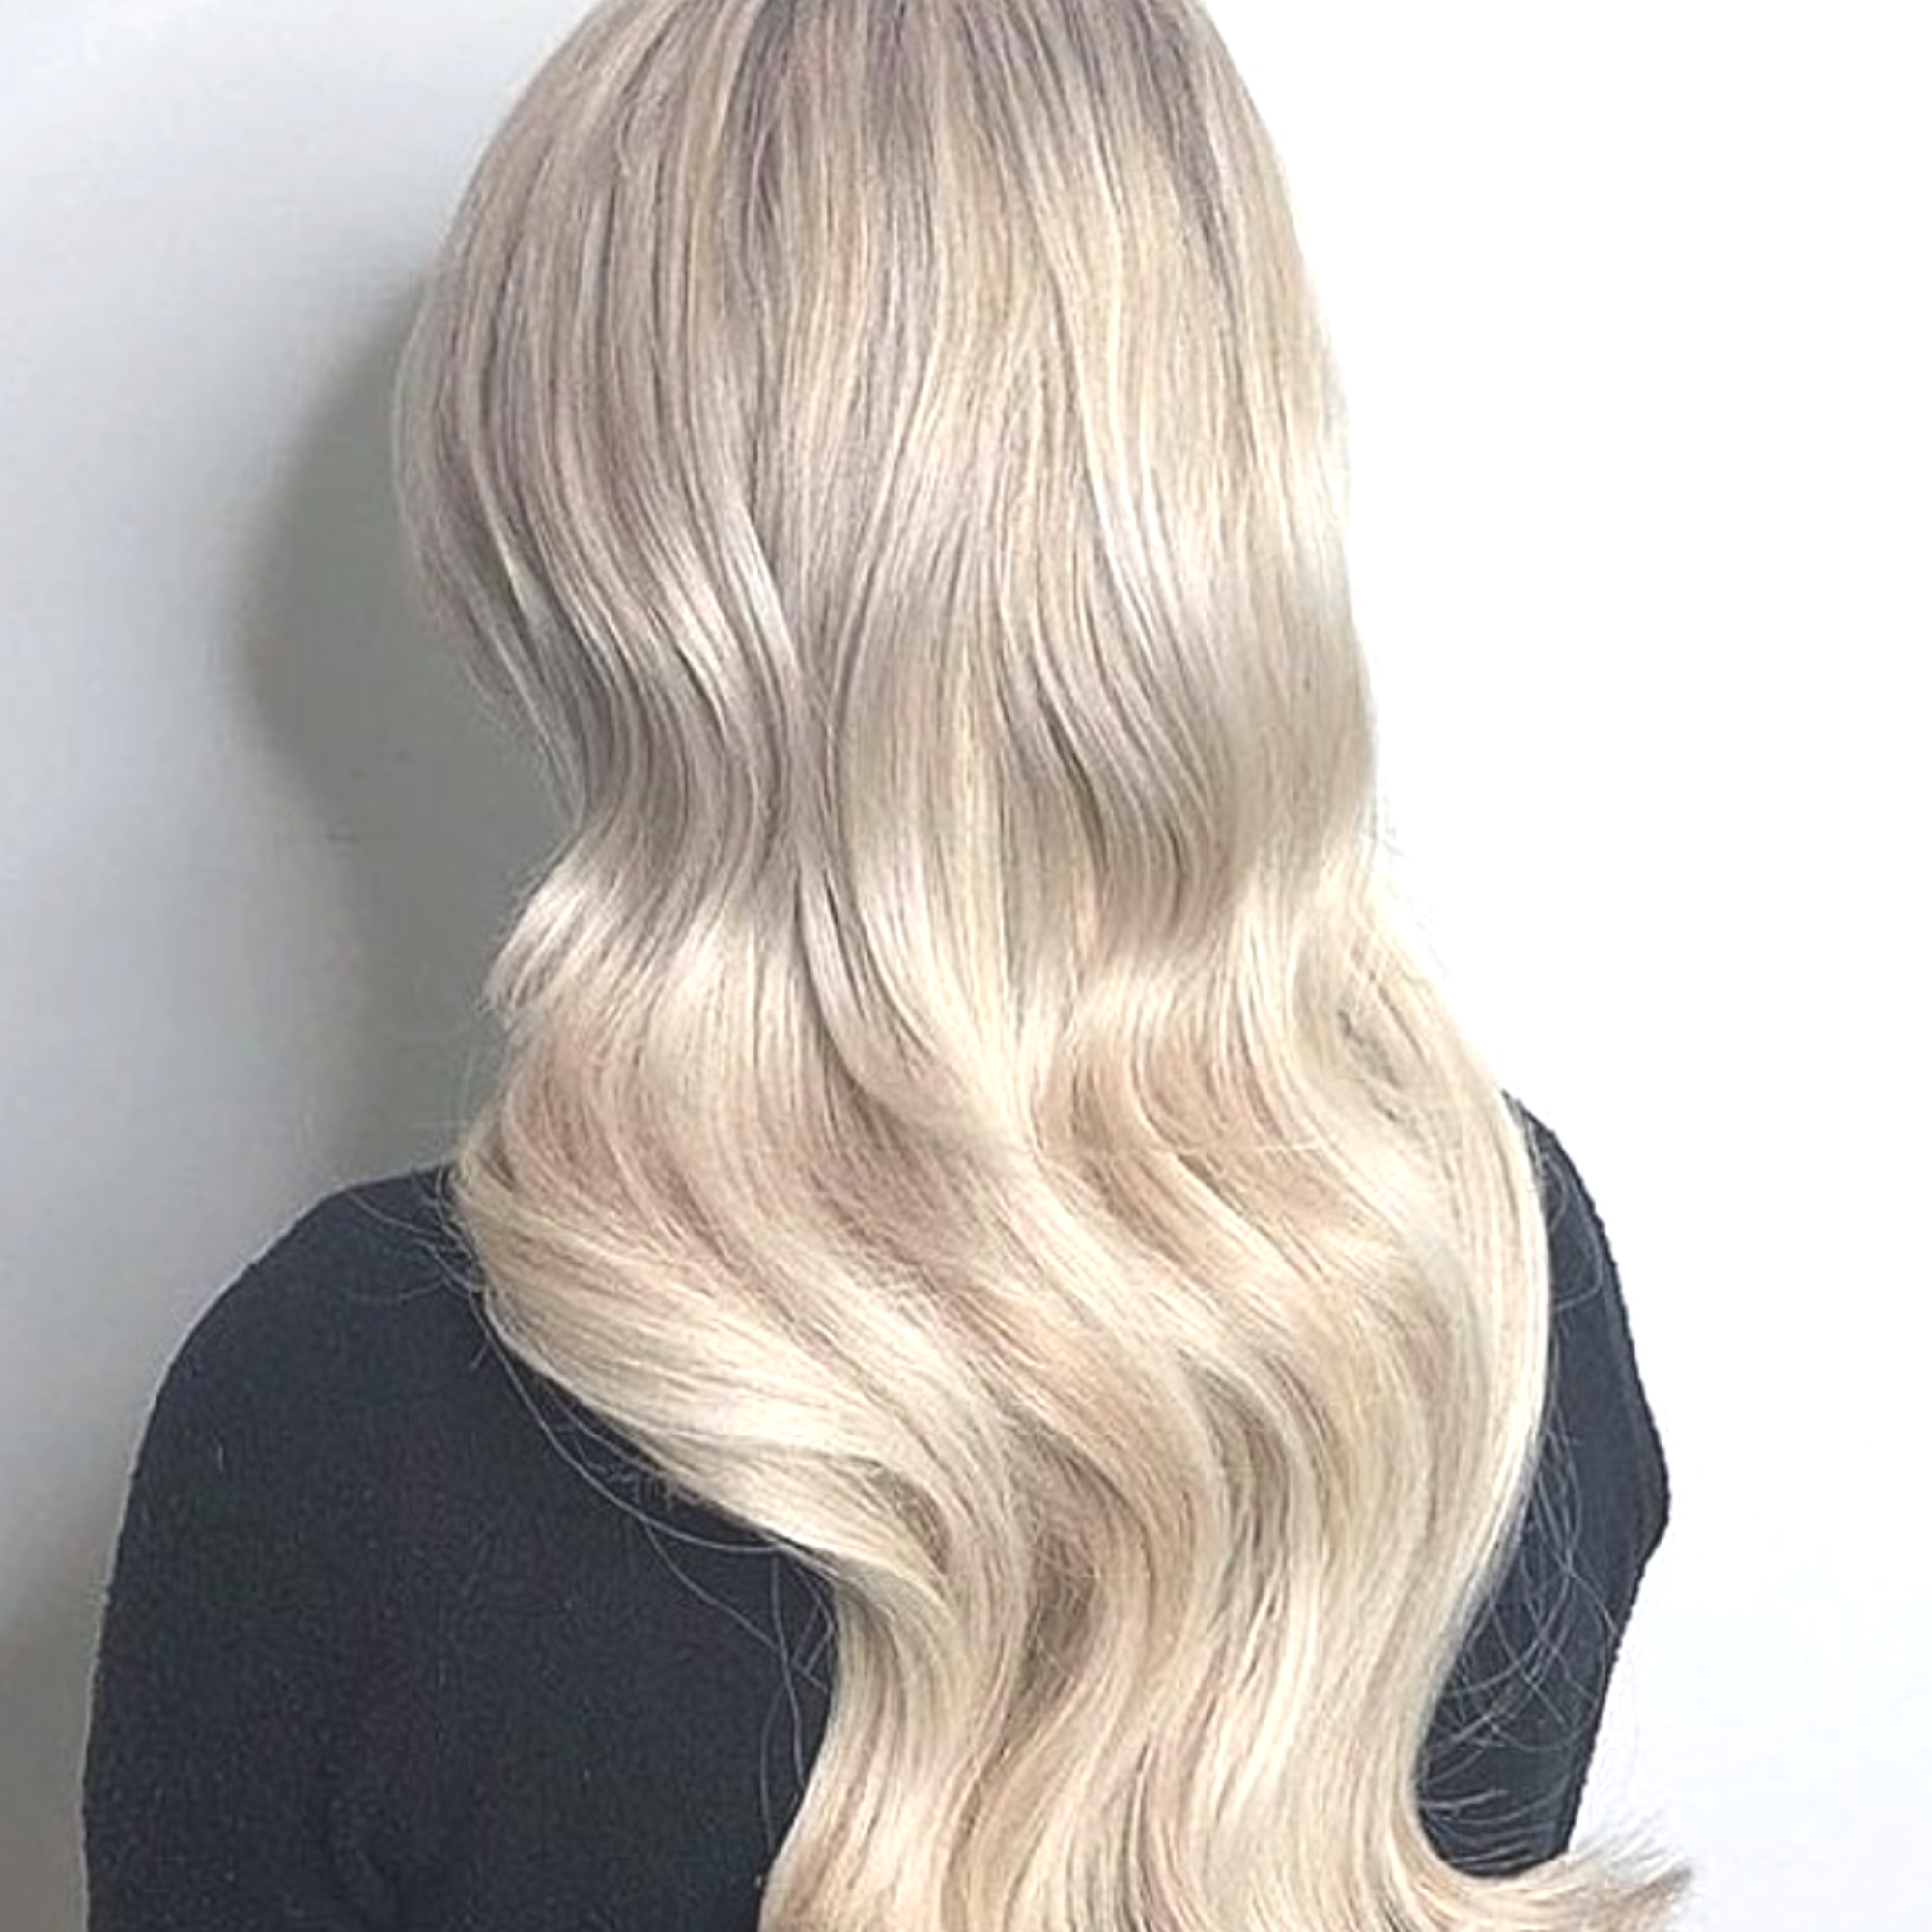 "hair rehab london 22" weft hair extensions shade swatch titled blonde af"